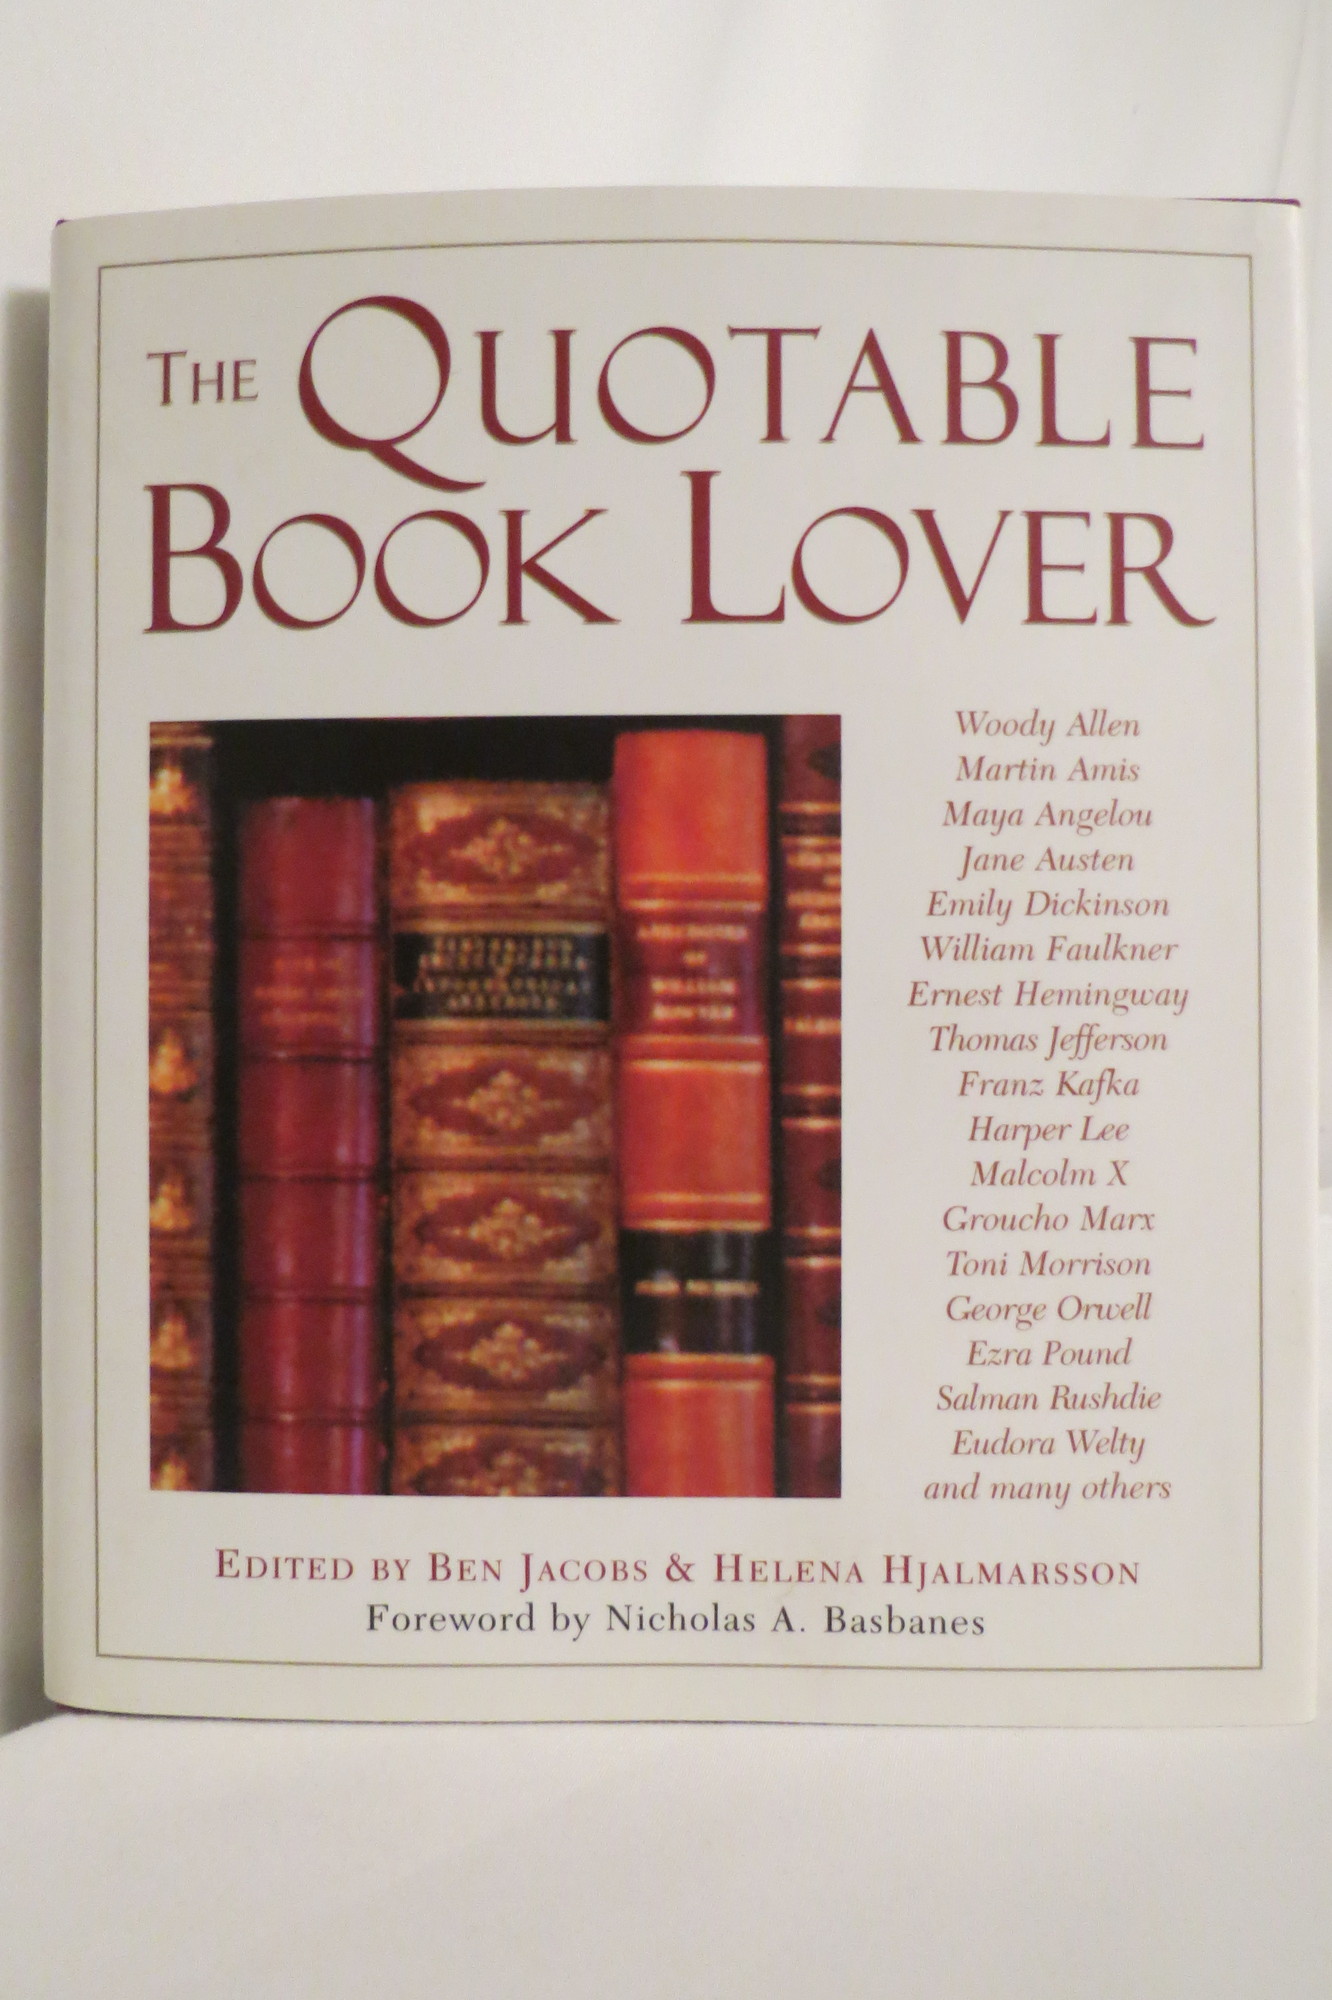 Image for THE QUOTABLE BOOK LOVER (DJ protected by a brand new, clear, acid-free mylar cover)